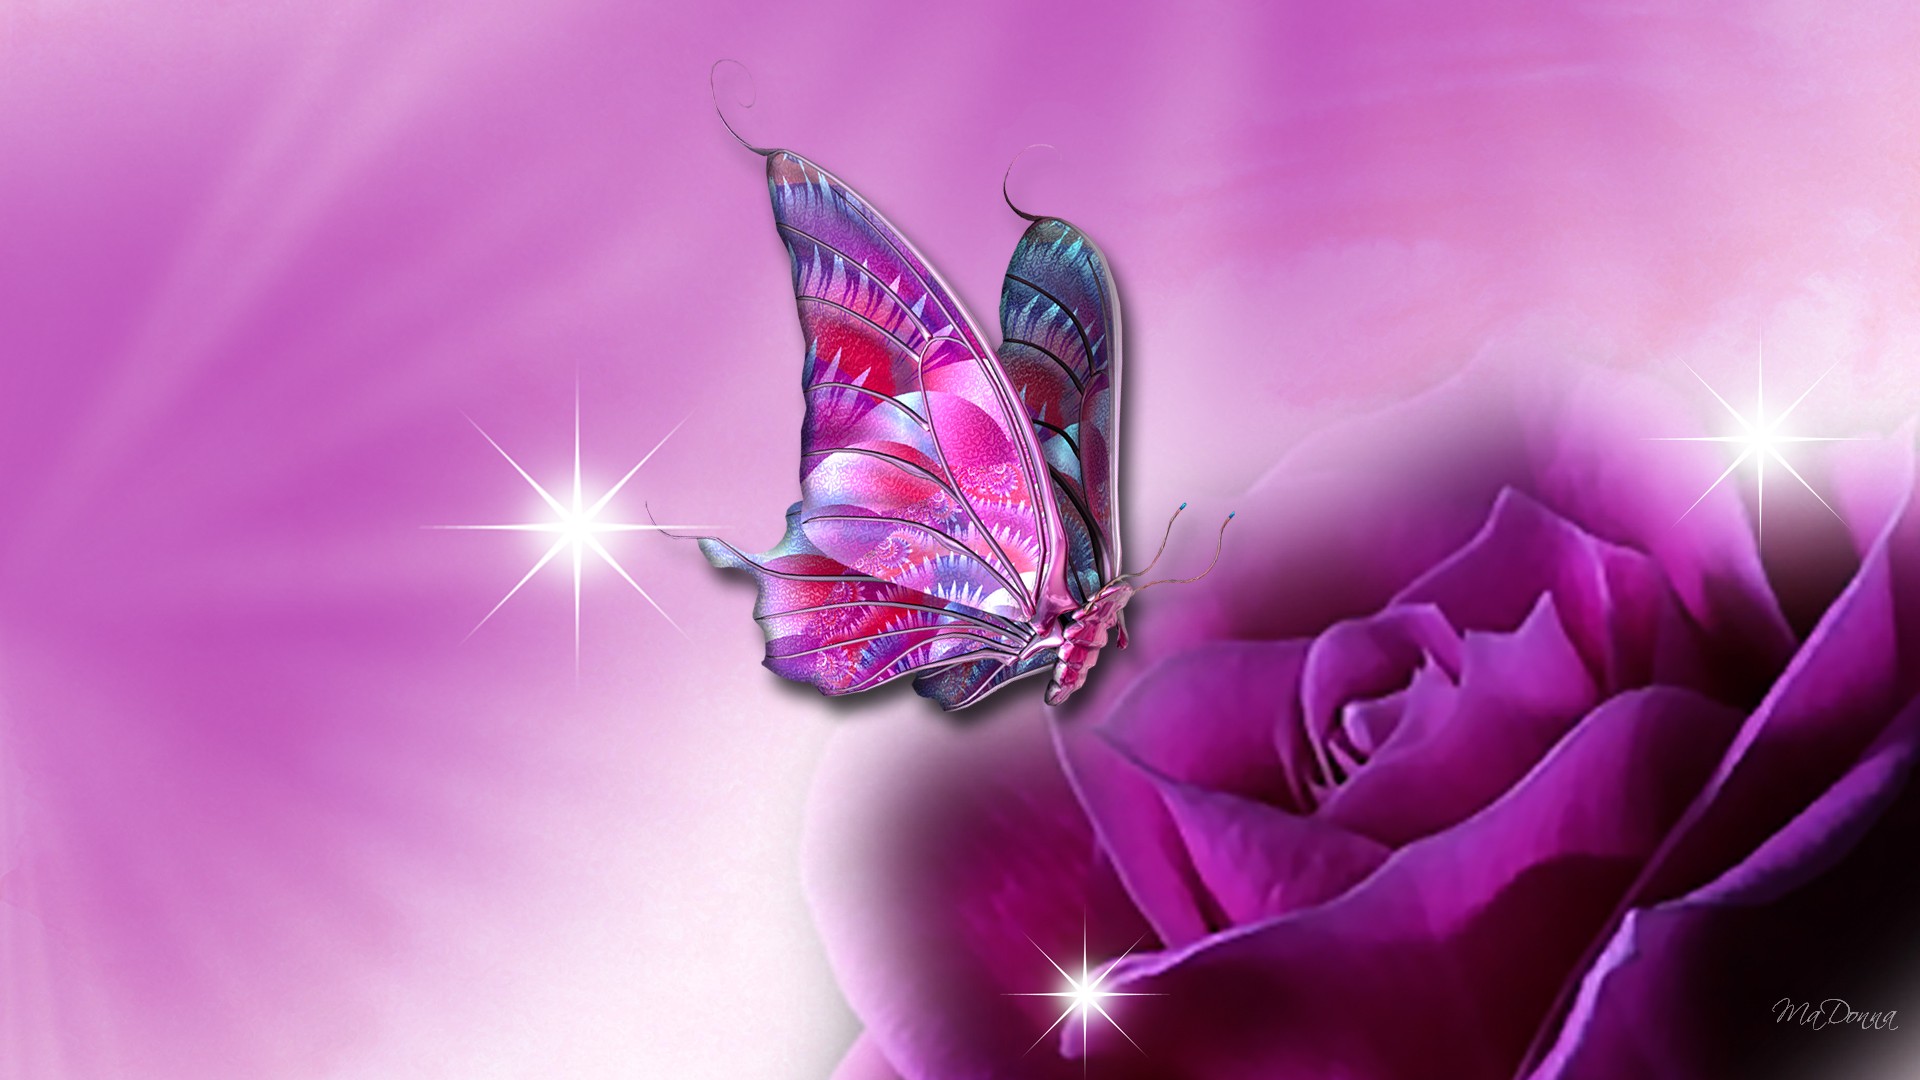 Awesome Butterfly For Laptop Wallpaper Full HD